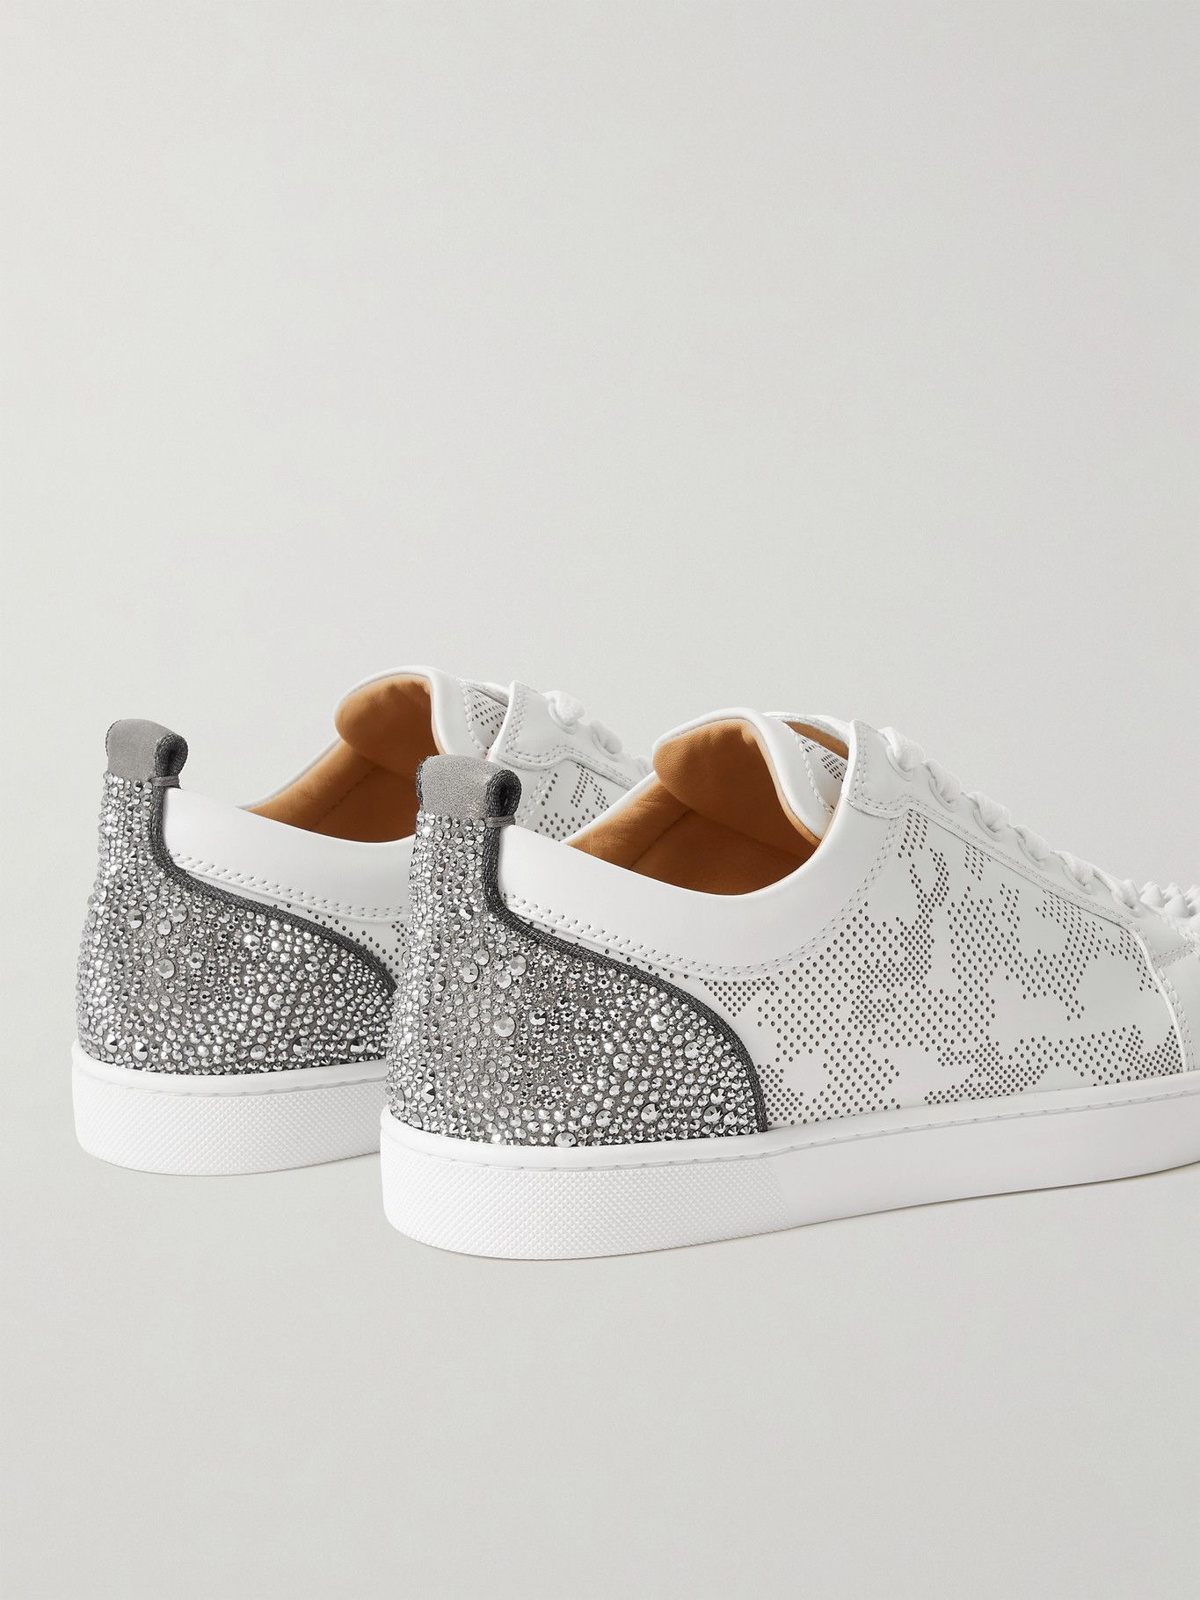 Christian Louboutin, Lou Spikes perforated leather sneakers